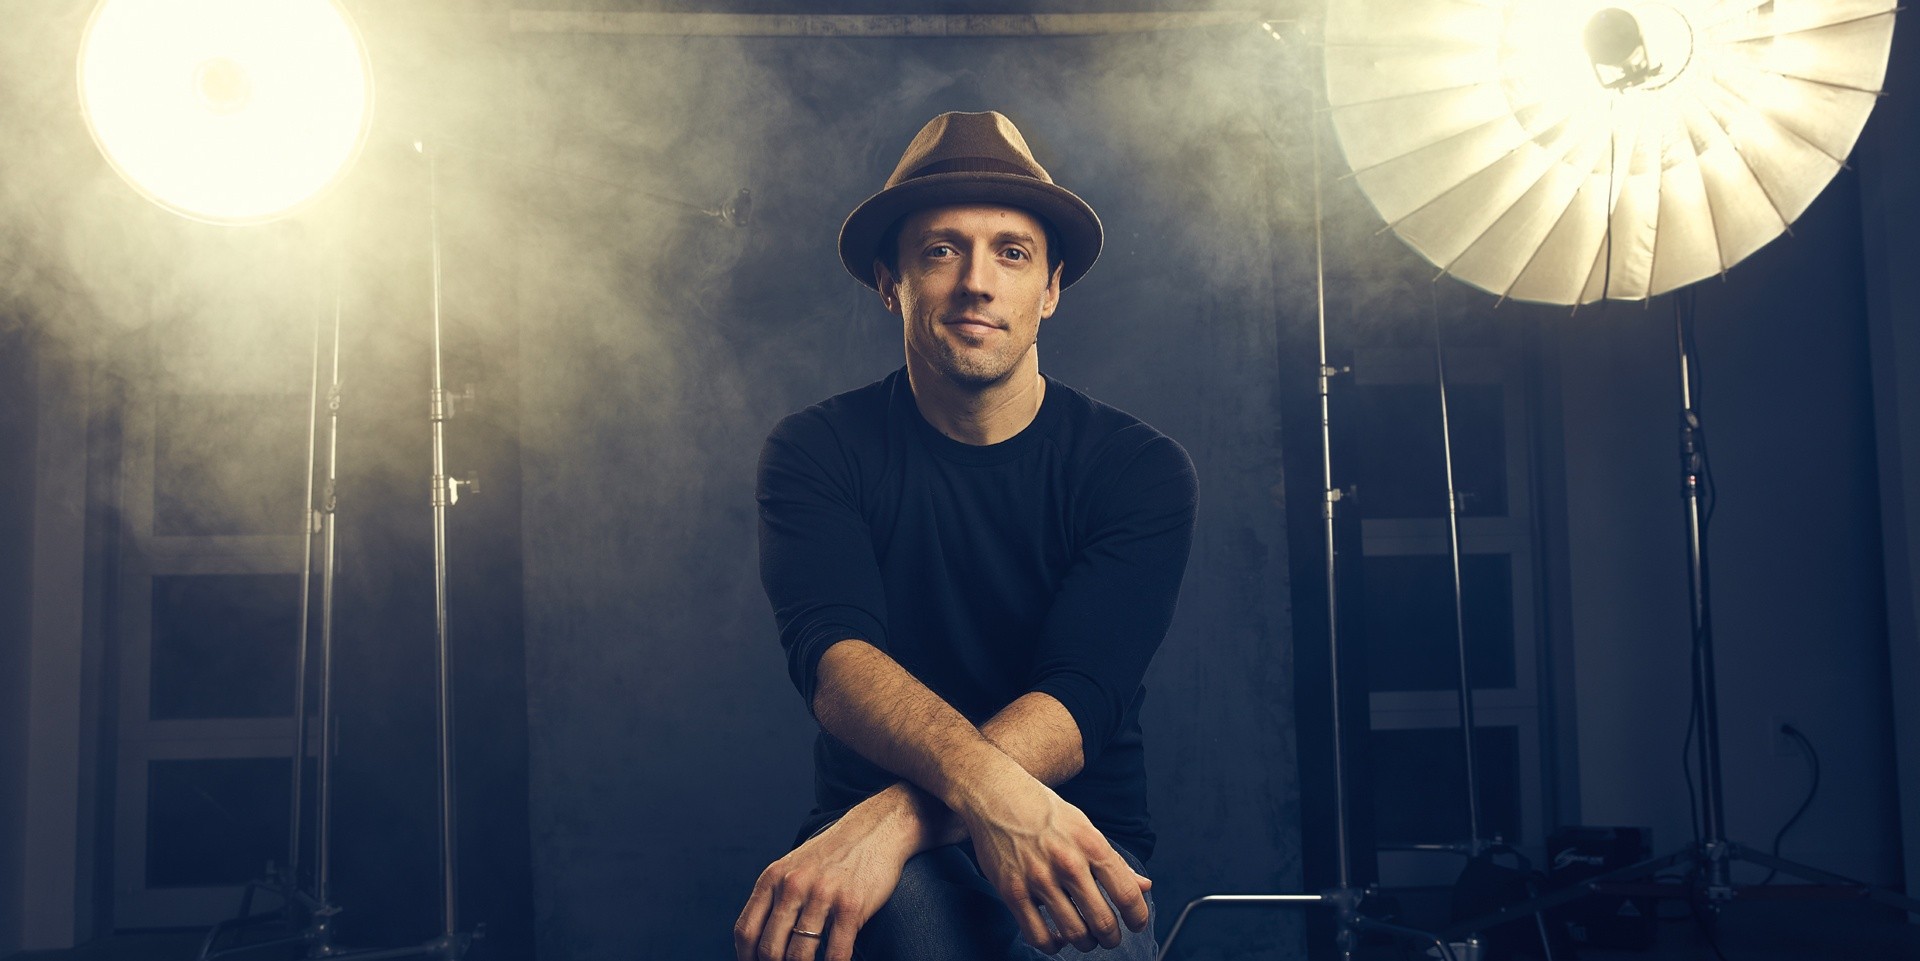 Jason Mraz is coming to Singapore for his only show in Asia this year